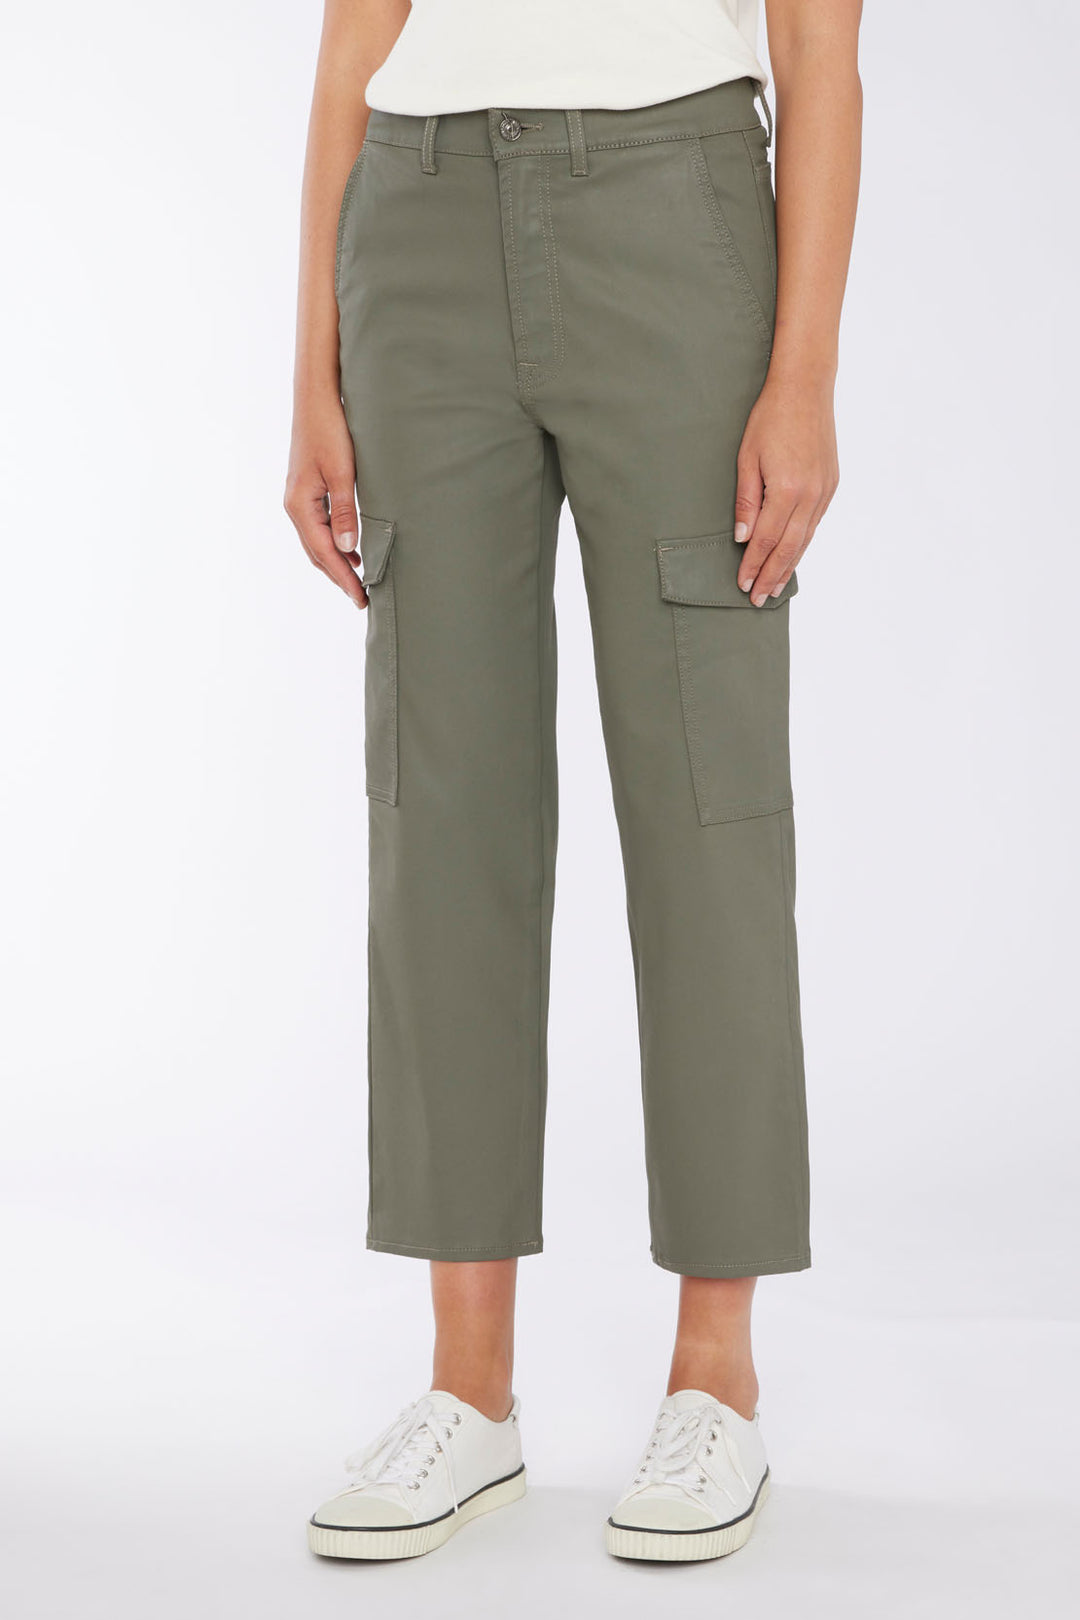 LOGAN COATED CARGO PANTS - 7 FOR ALL MANKIND